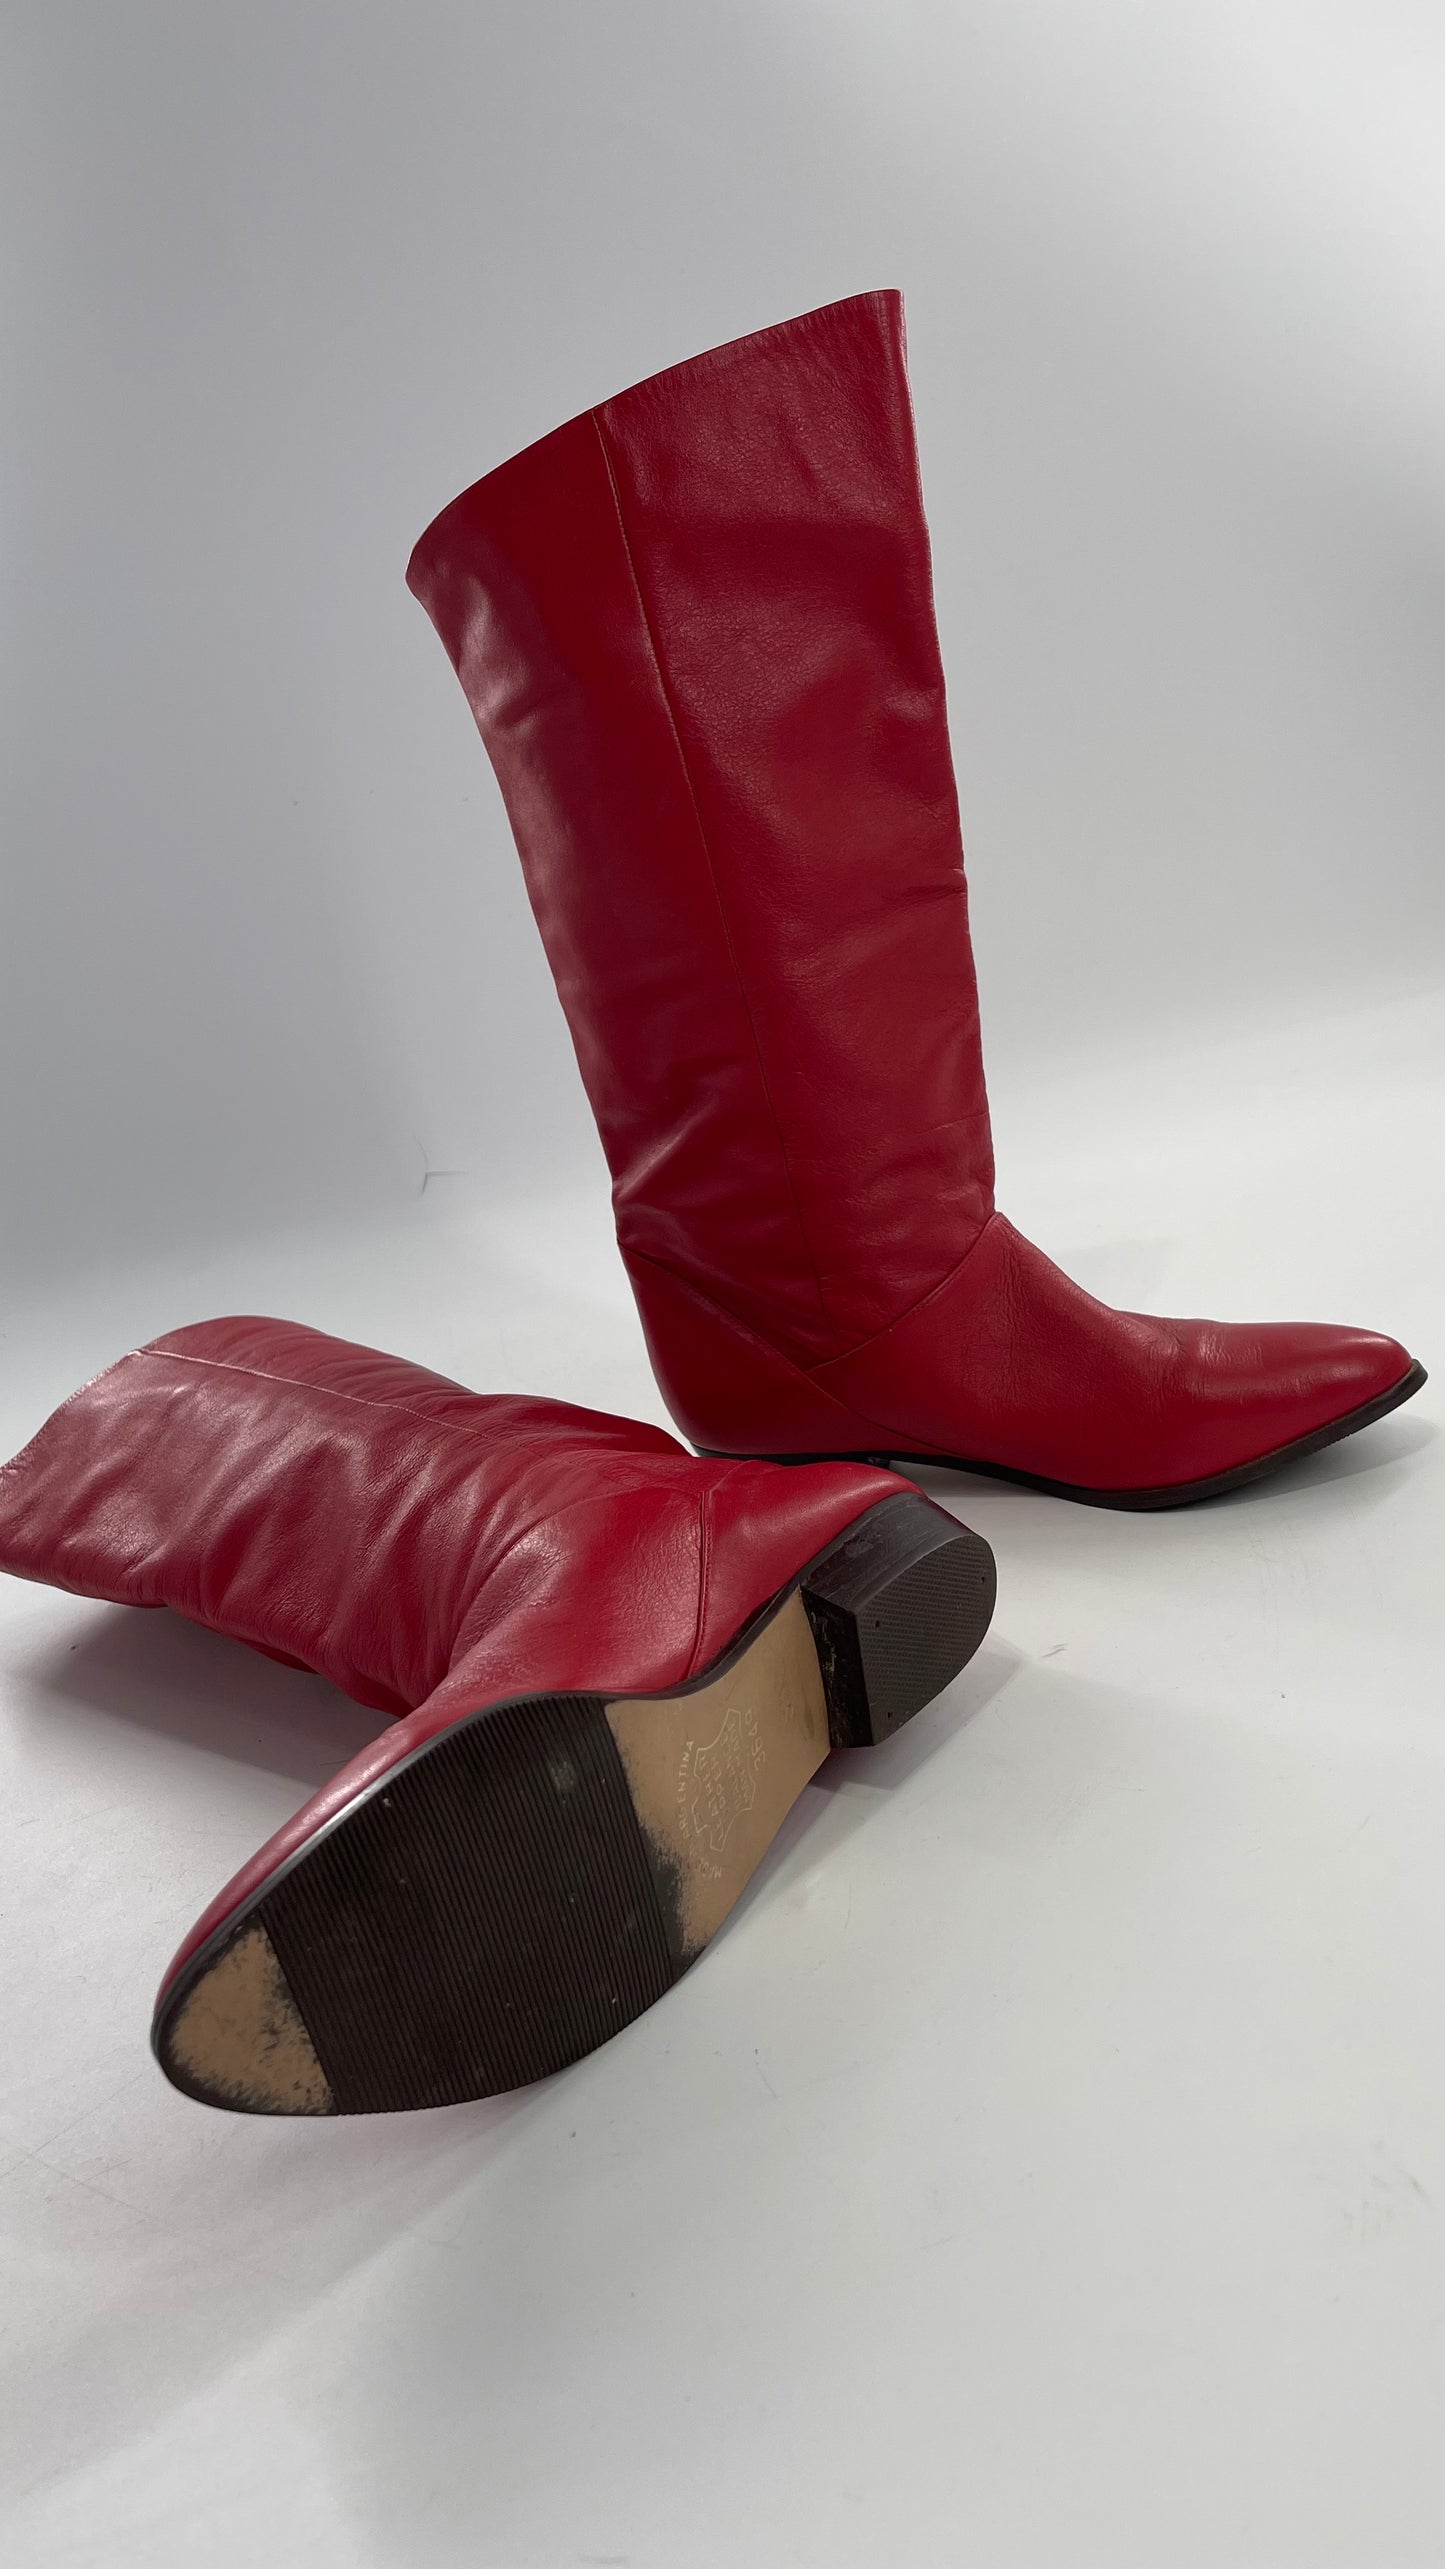 Vintage 1980s Red Argentinian Leather Pointed Toe Baggy Boots (8)